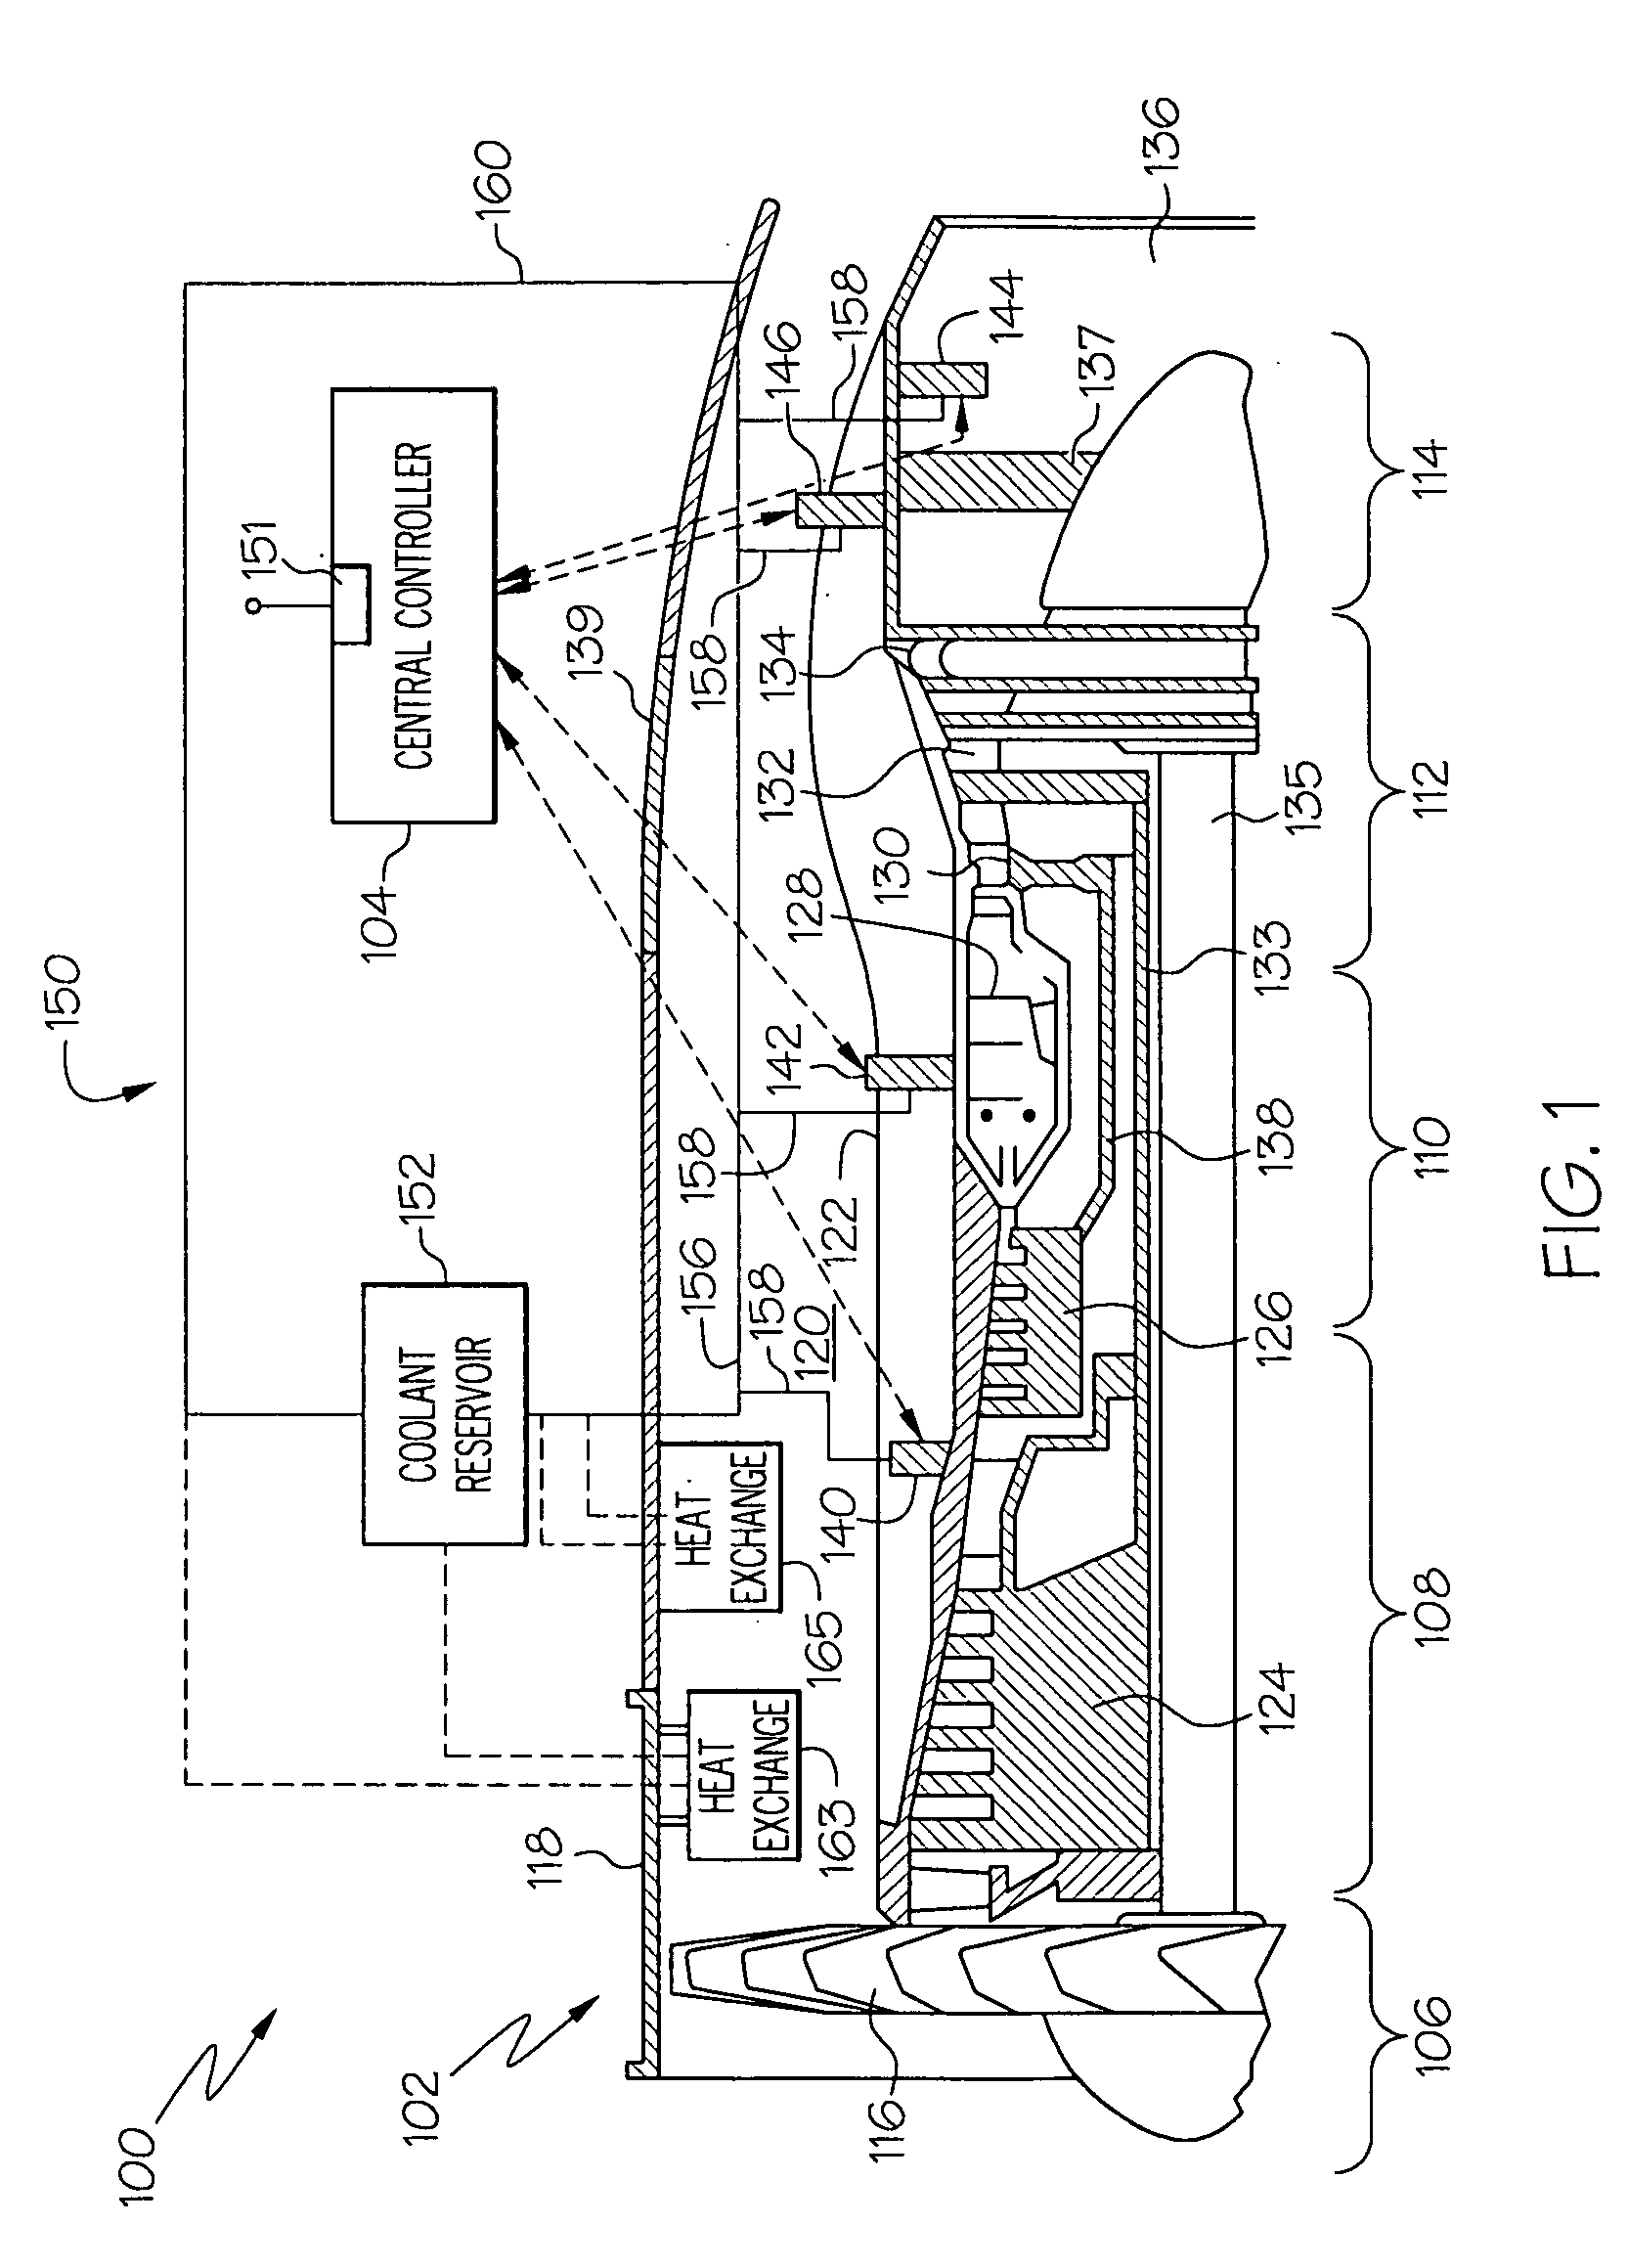 Distributed engine control systems and gas turbine engines